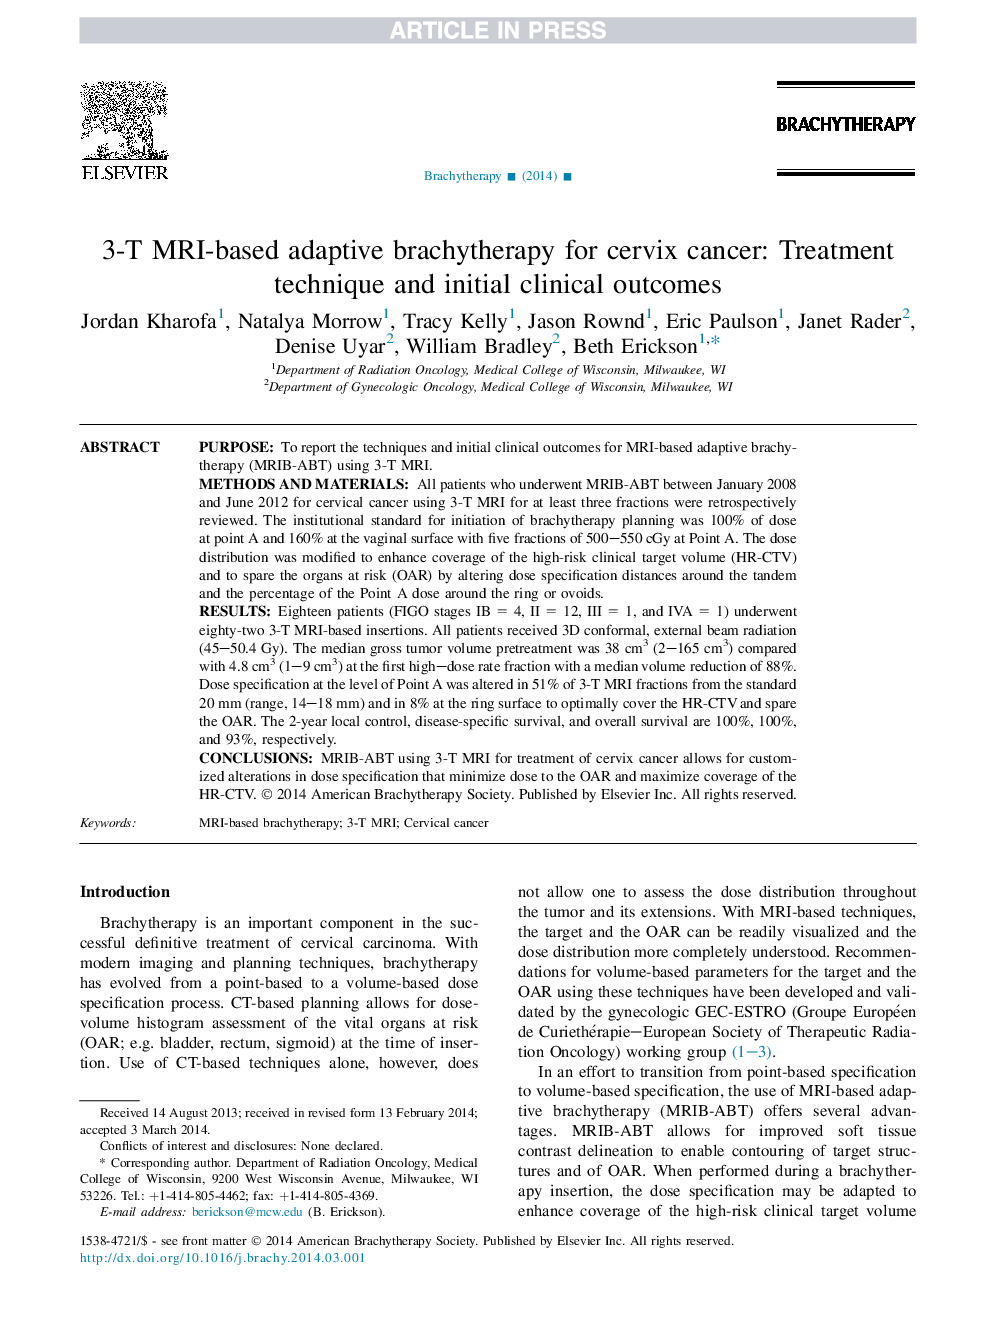 3-T MRI-based adaptive brachytherapy for cervix cancer: Treatment technique and initial clinical outcomes